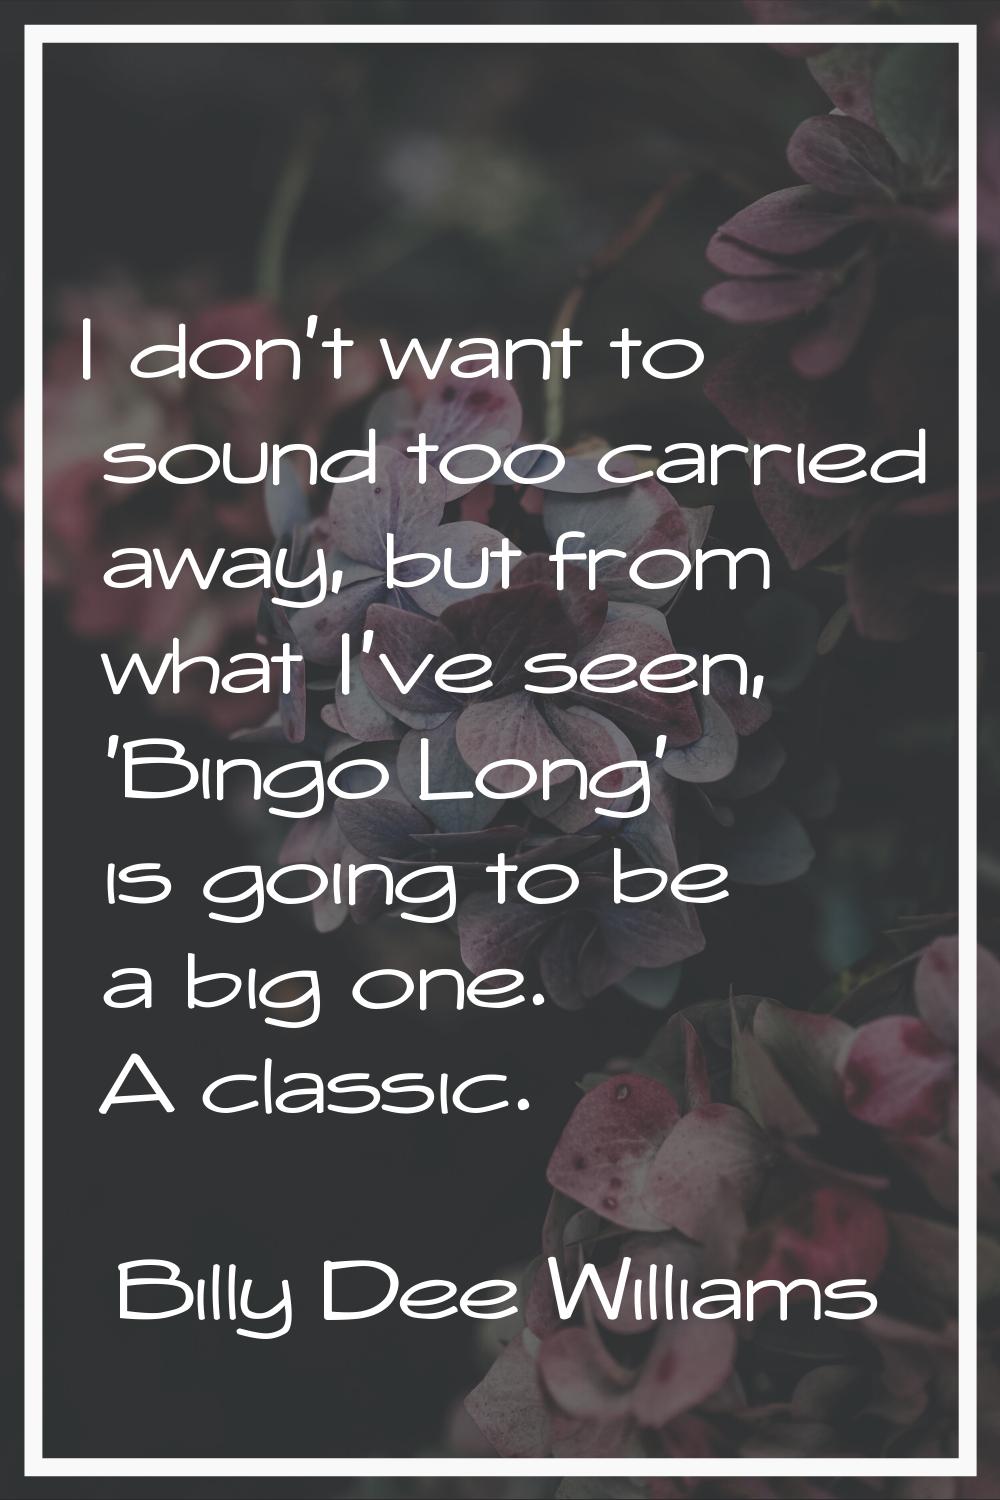 I don't want to sound too carried away, but from what I've seen, 'Bingo Long' is going to be a big 